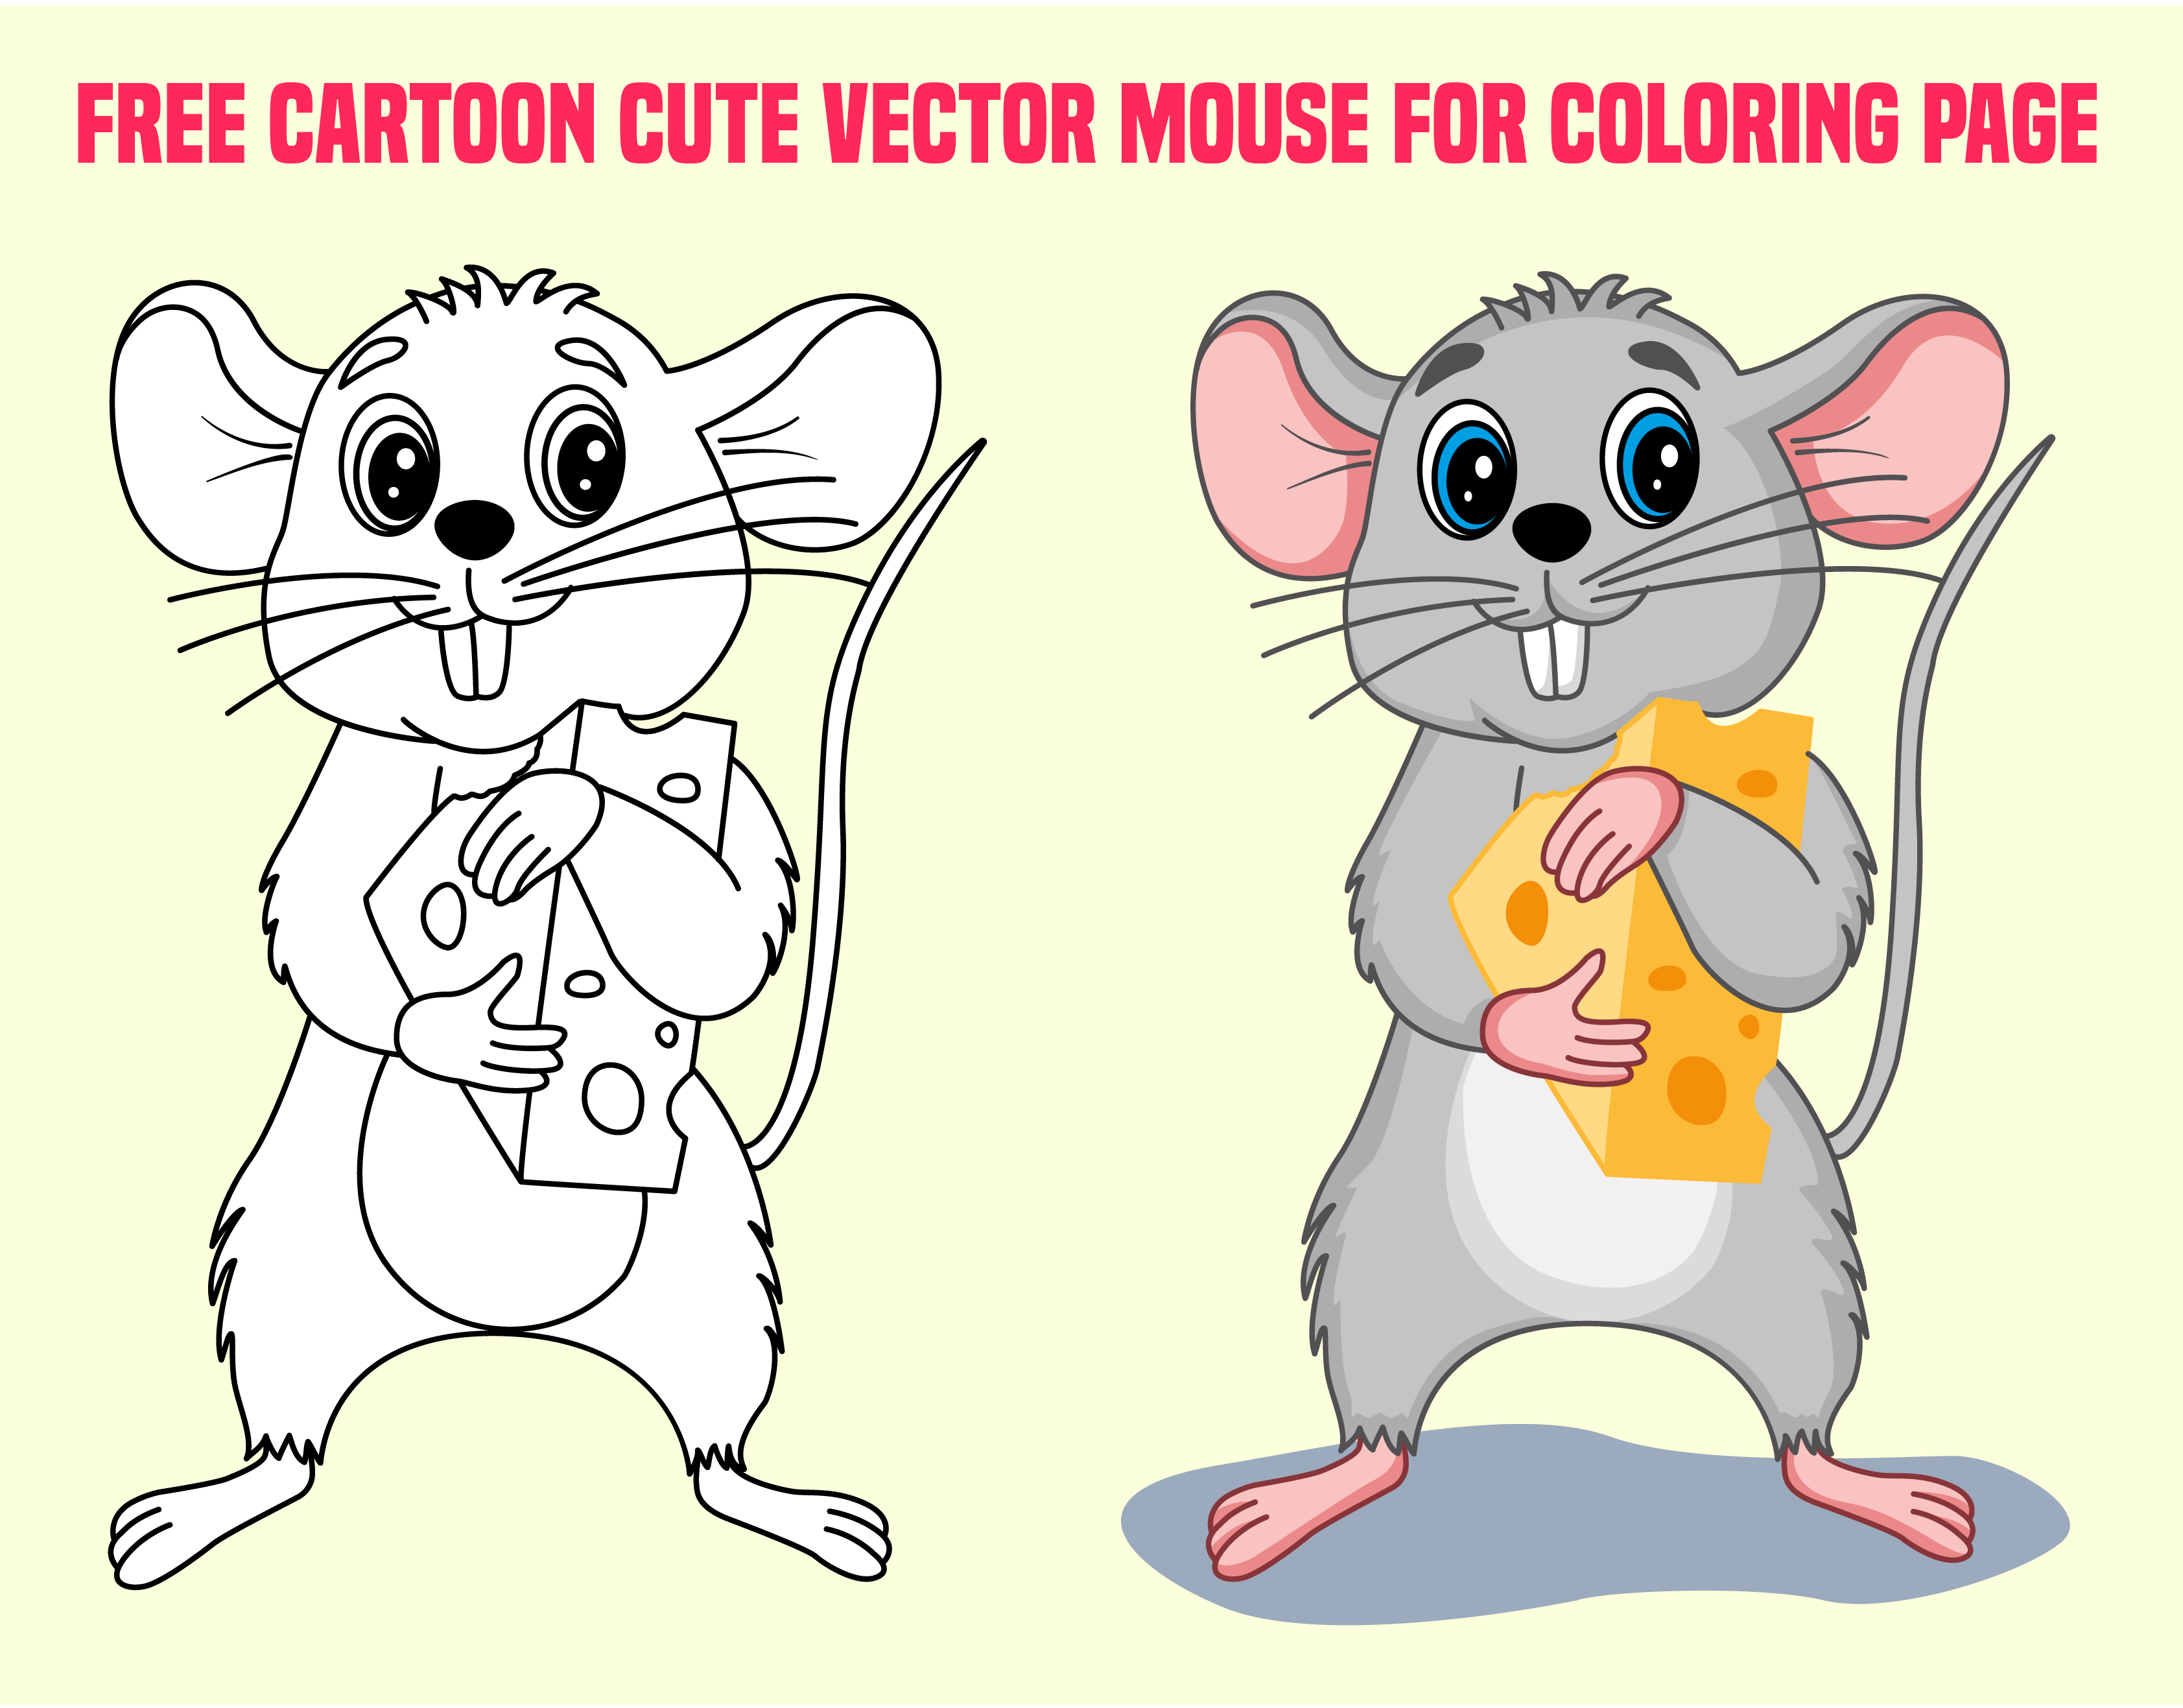 Vector illustration of a funny little mouse rendition image